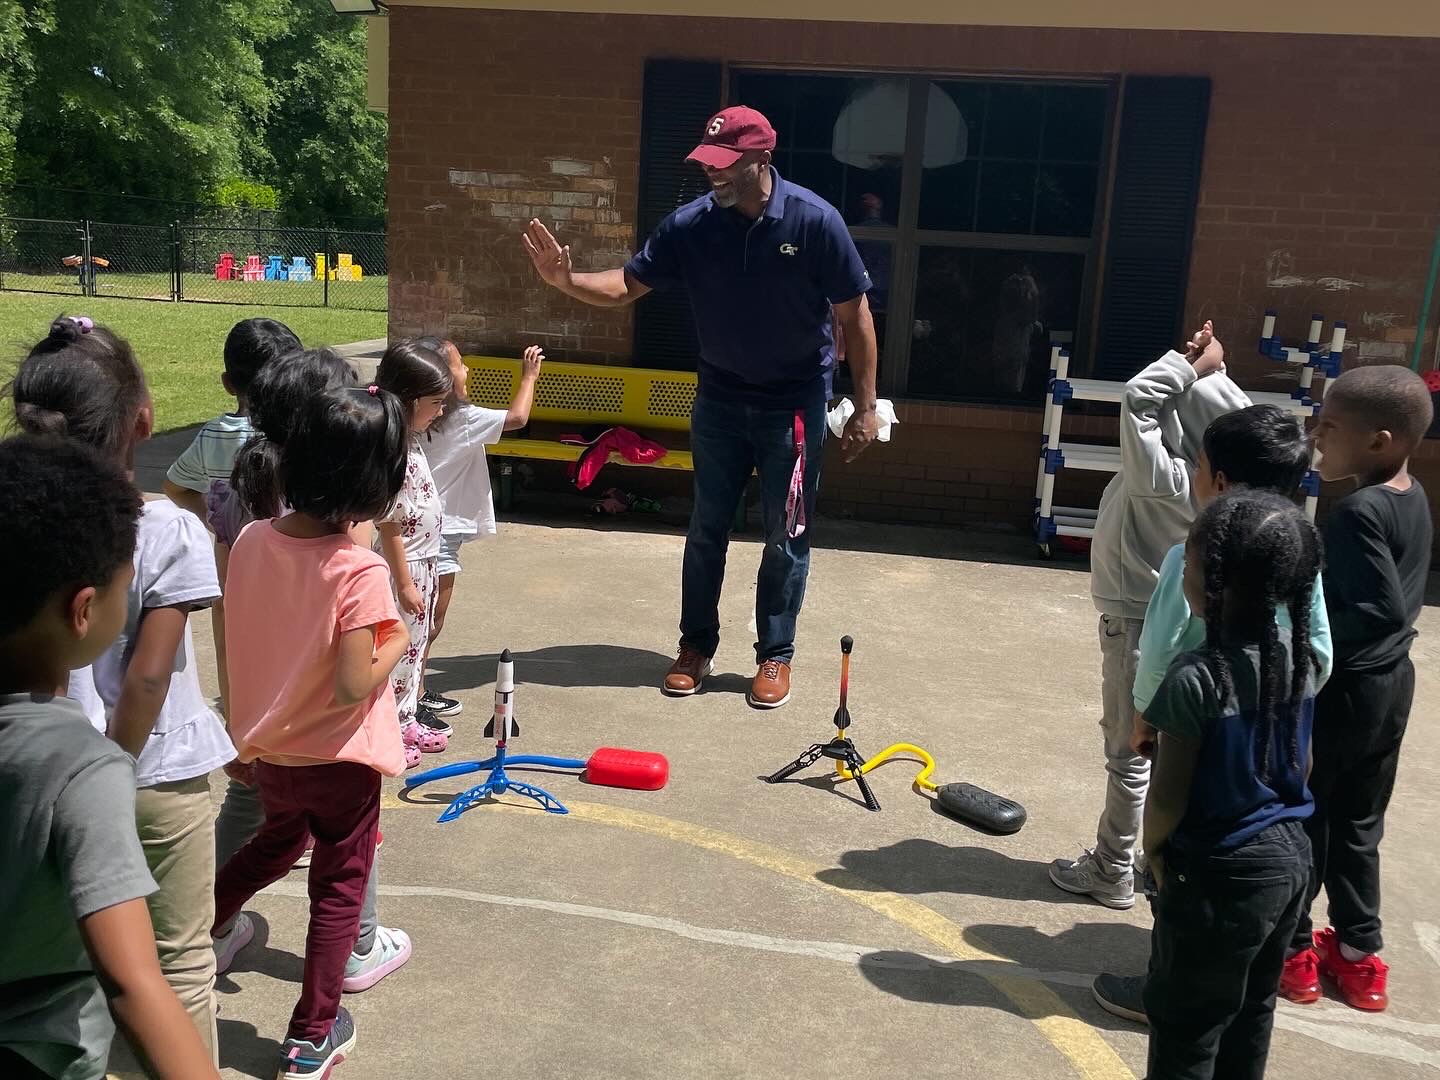 Jay Elliott volunteering at his son's school where he hosted a "Space Day" to get the kids excited about STEM and Georgia Tech.